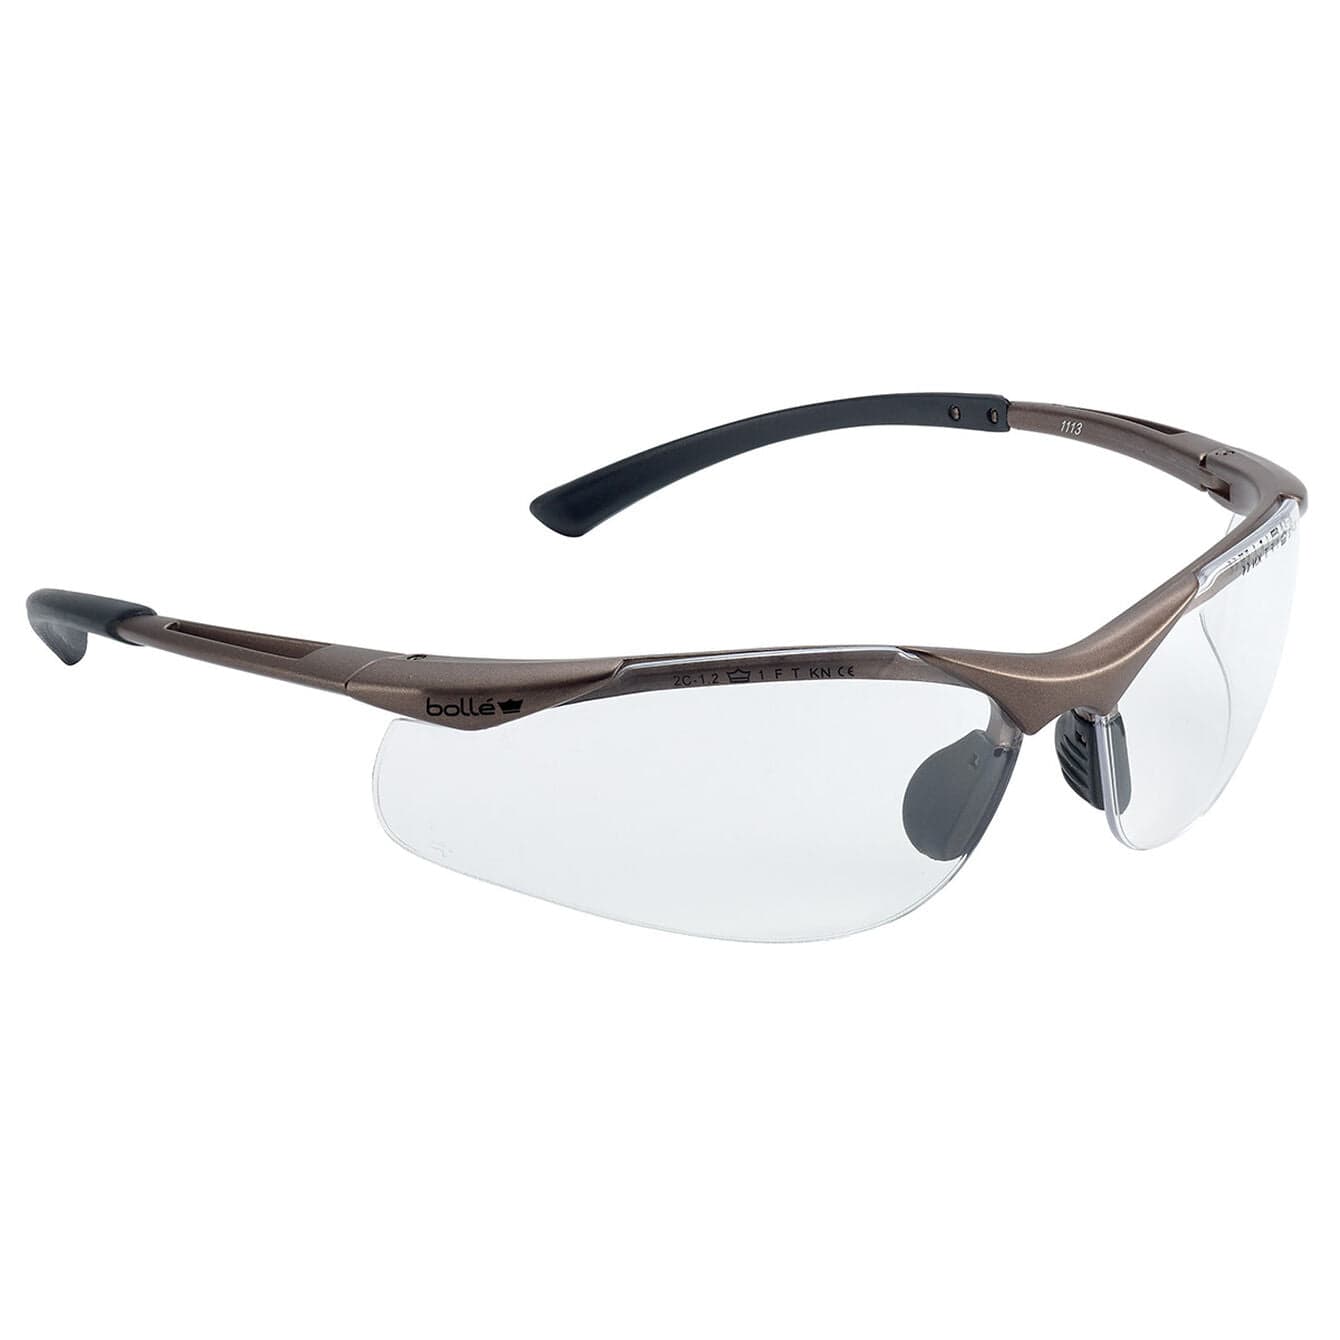 Bolle Contour Safety Glasses with Gunmetal Frame and Clear Anti-Scratch and Anti-Fog Lenses